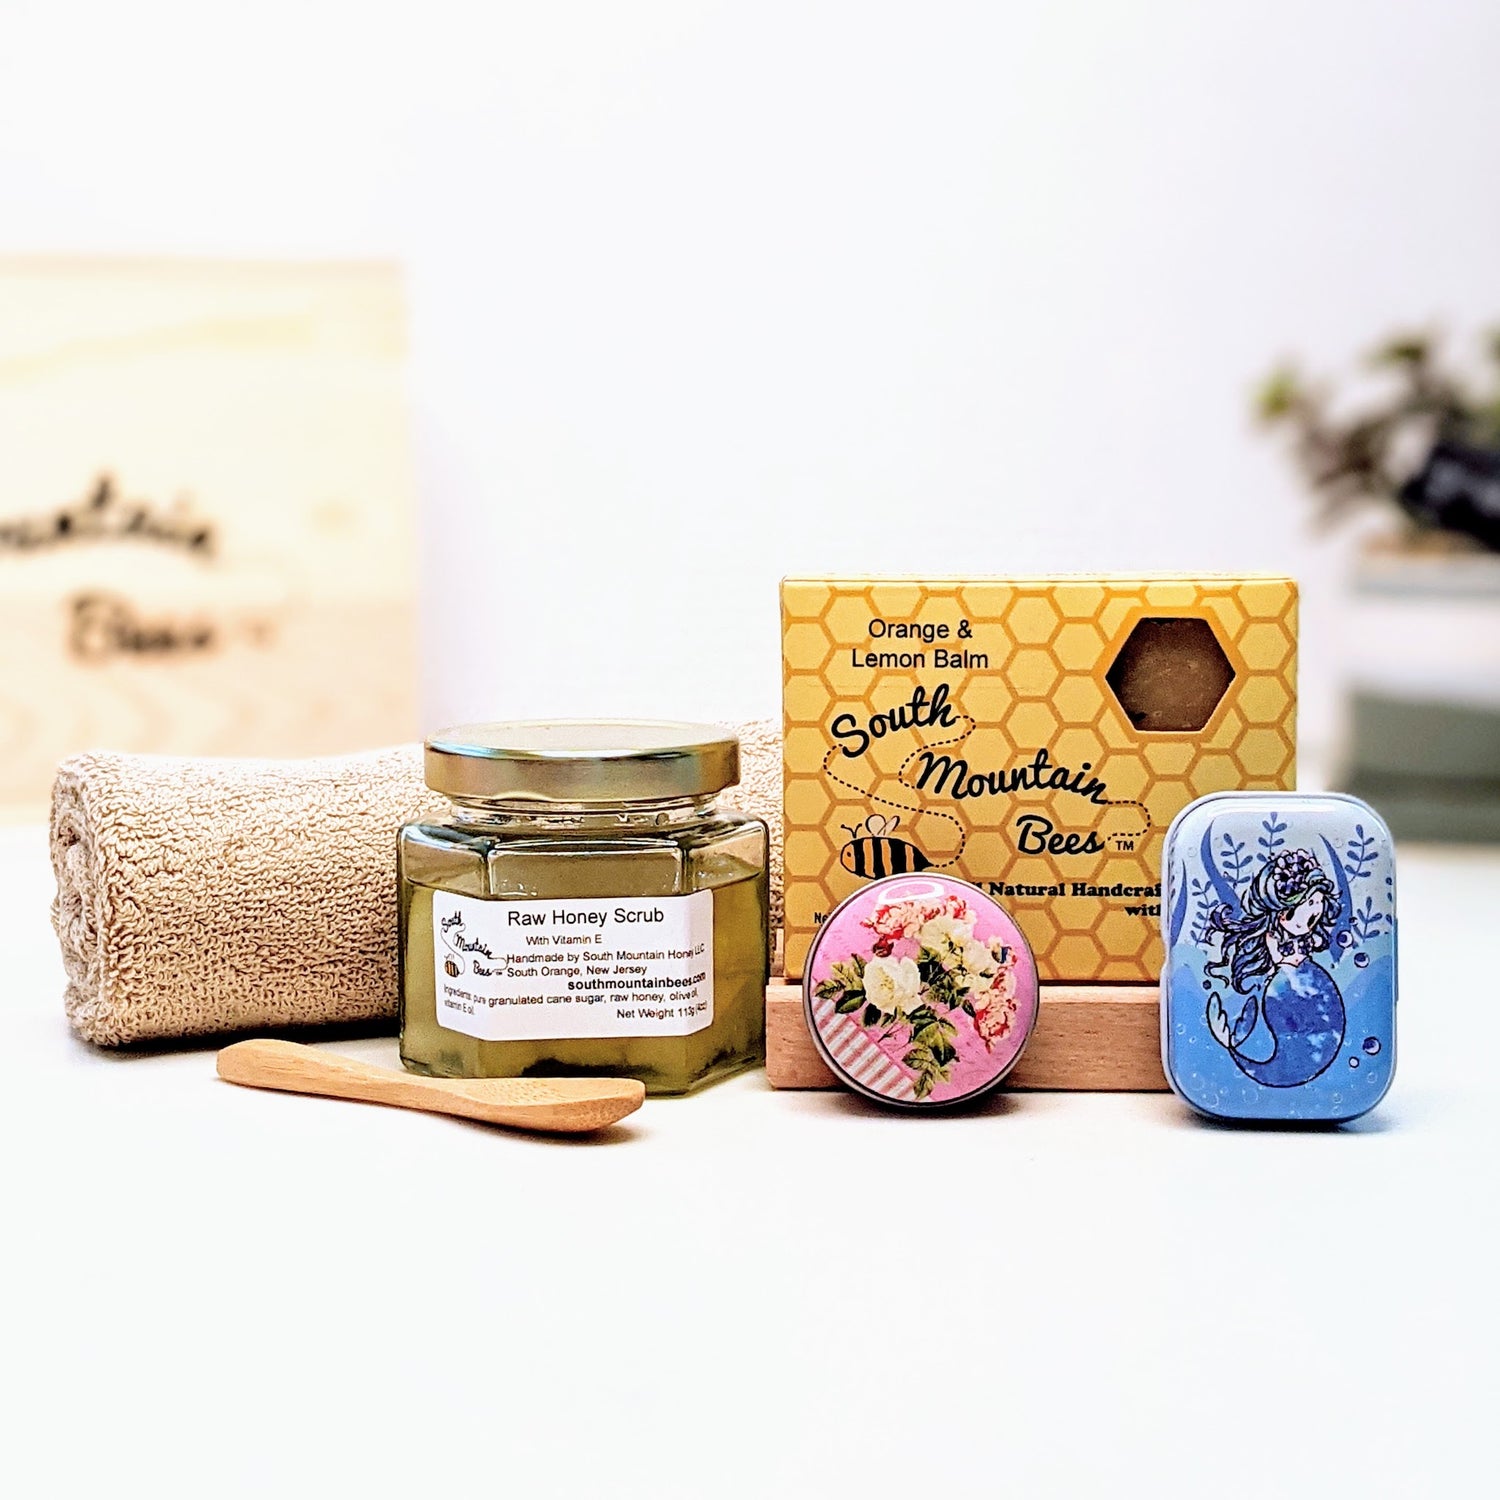 A bundle of bath and body products including soap, lip balm, salve, scrub, soap dish and washcloth.